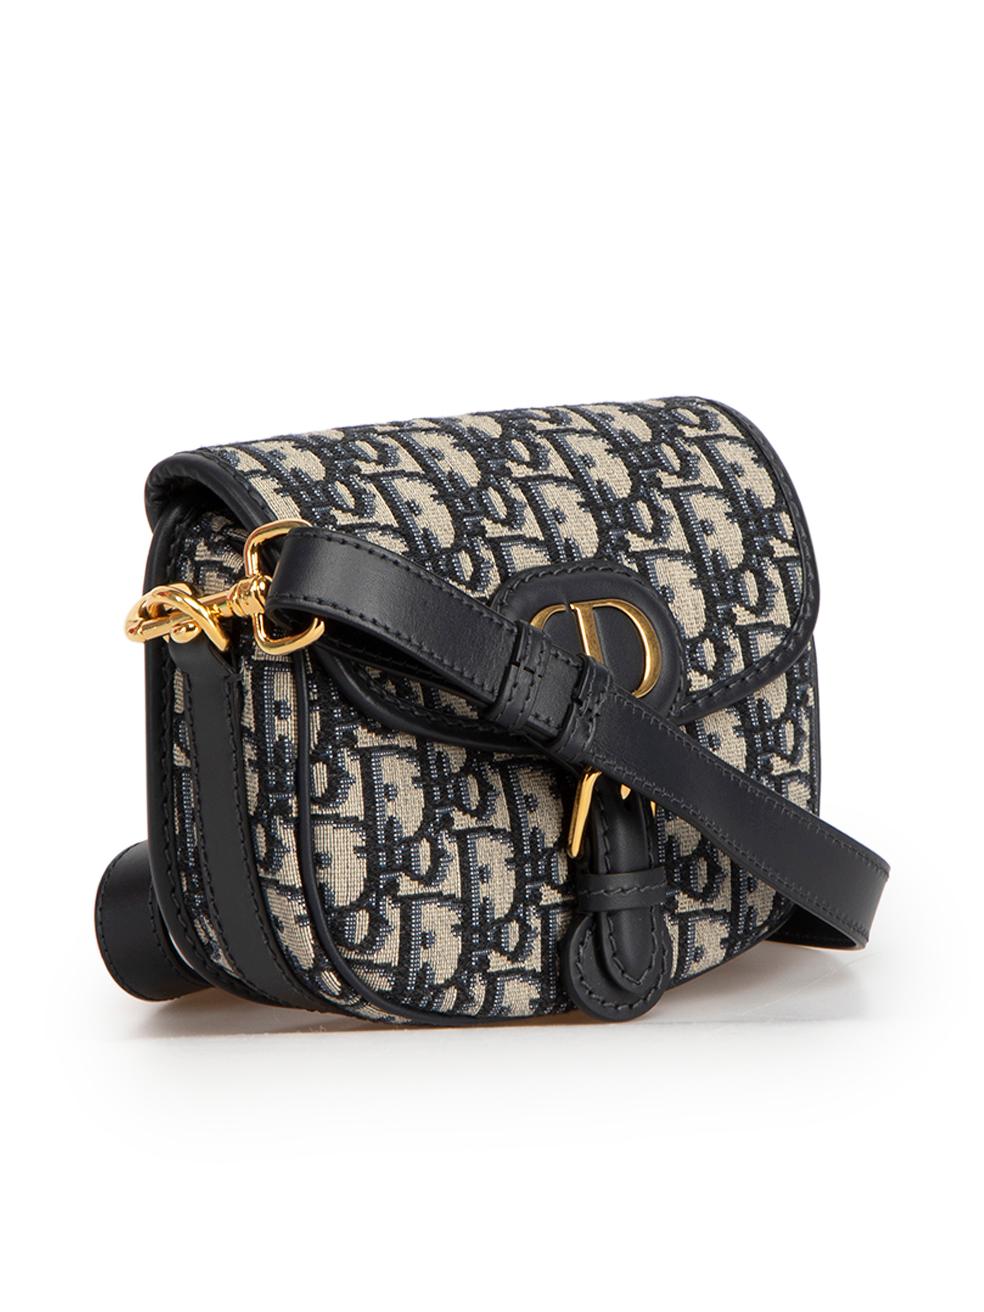 CONDITION is Never worn. No visible wear to bag is evident on this new Dior designer resale item. This item comes with original box and dust bag.
 
Details
Bobby model
Navy
Jacquard
Mini crossbody bag
Oblique pattern
1x Detachable and adjustable